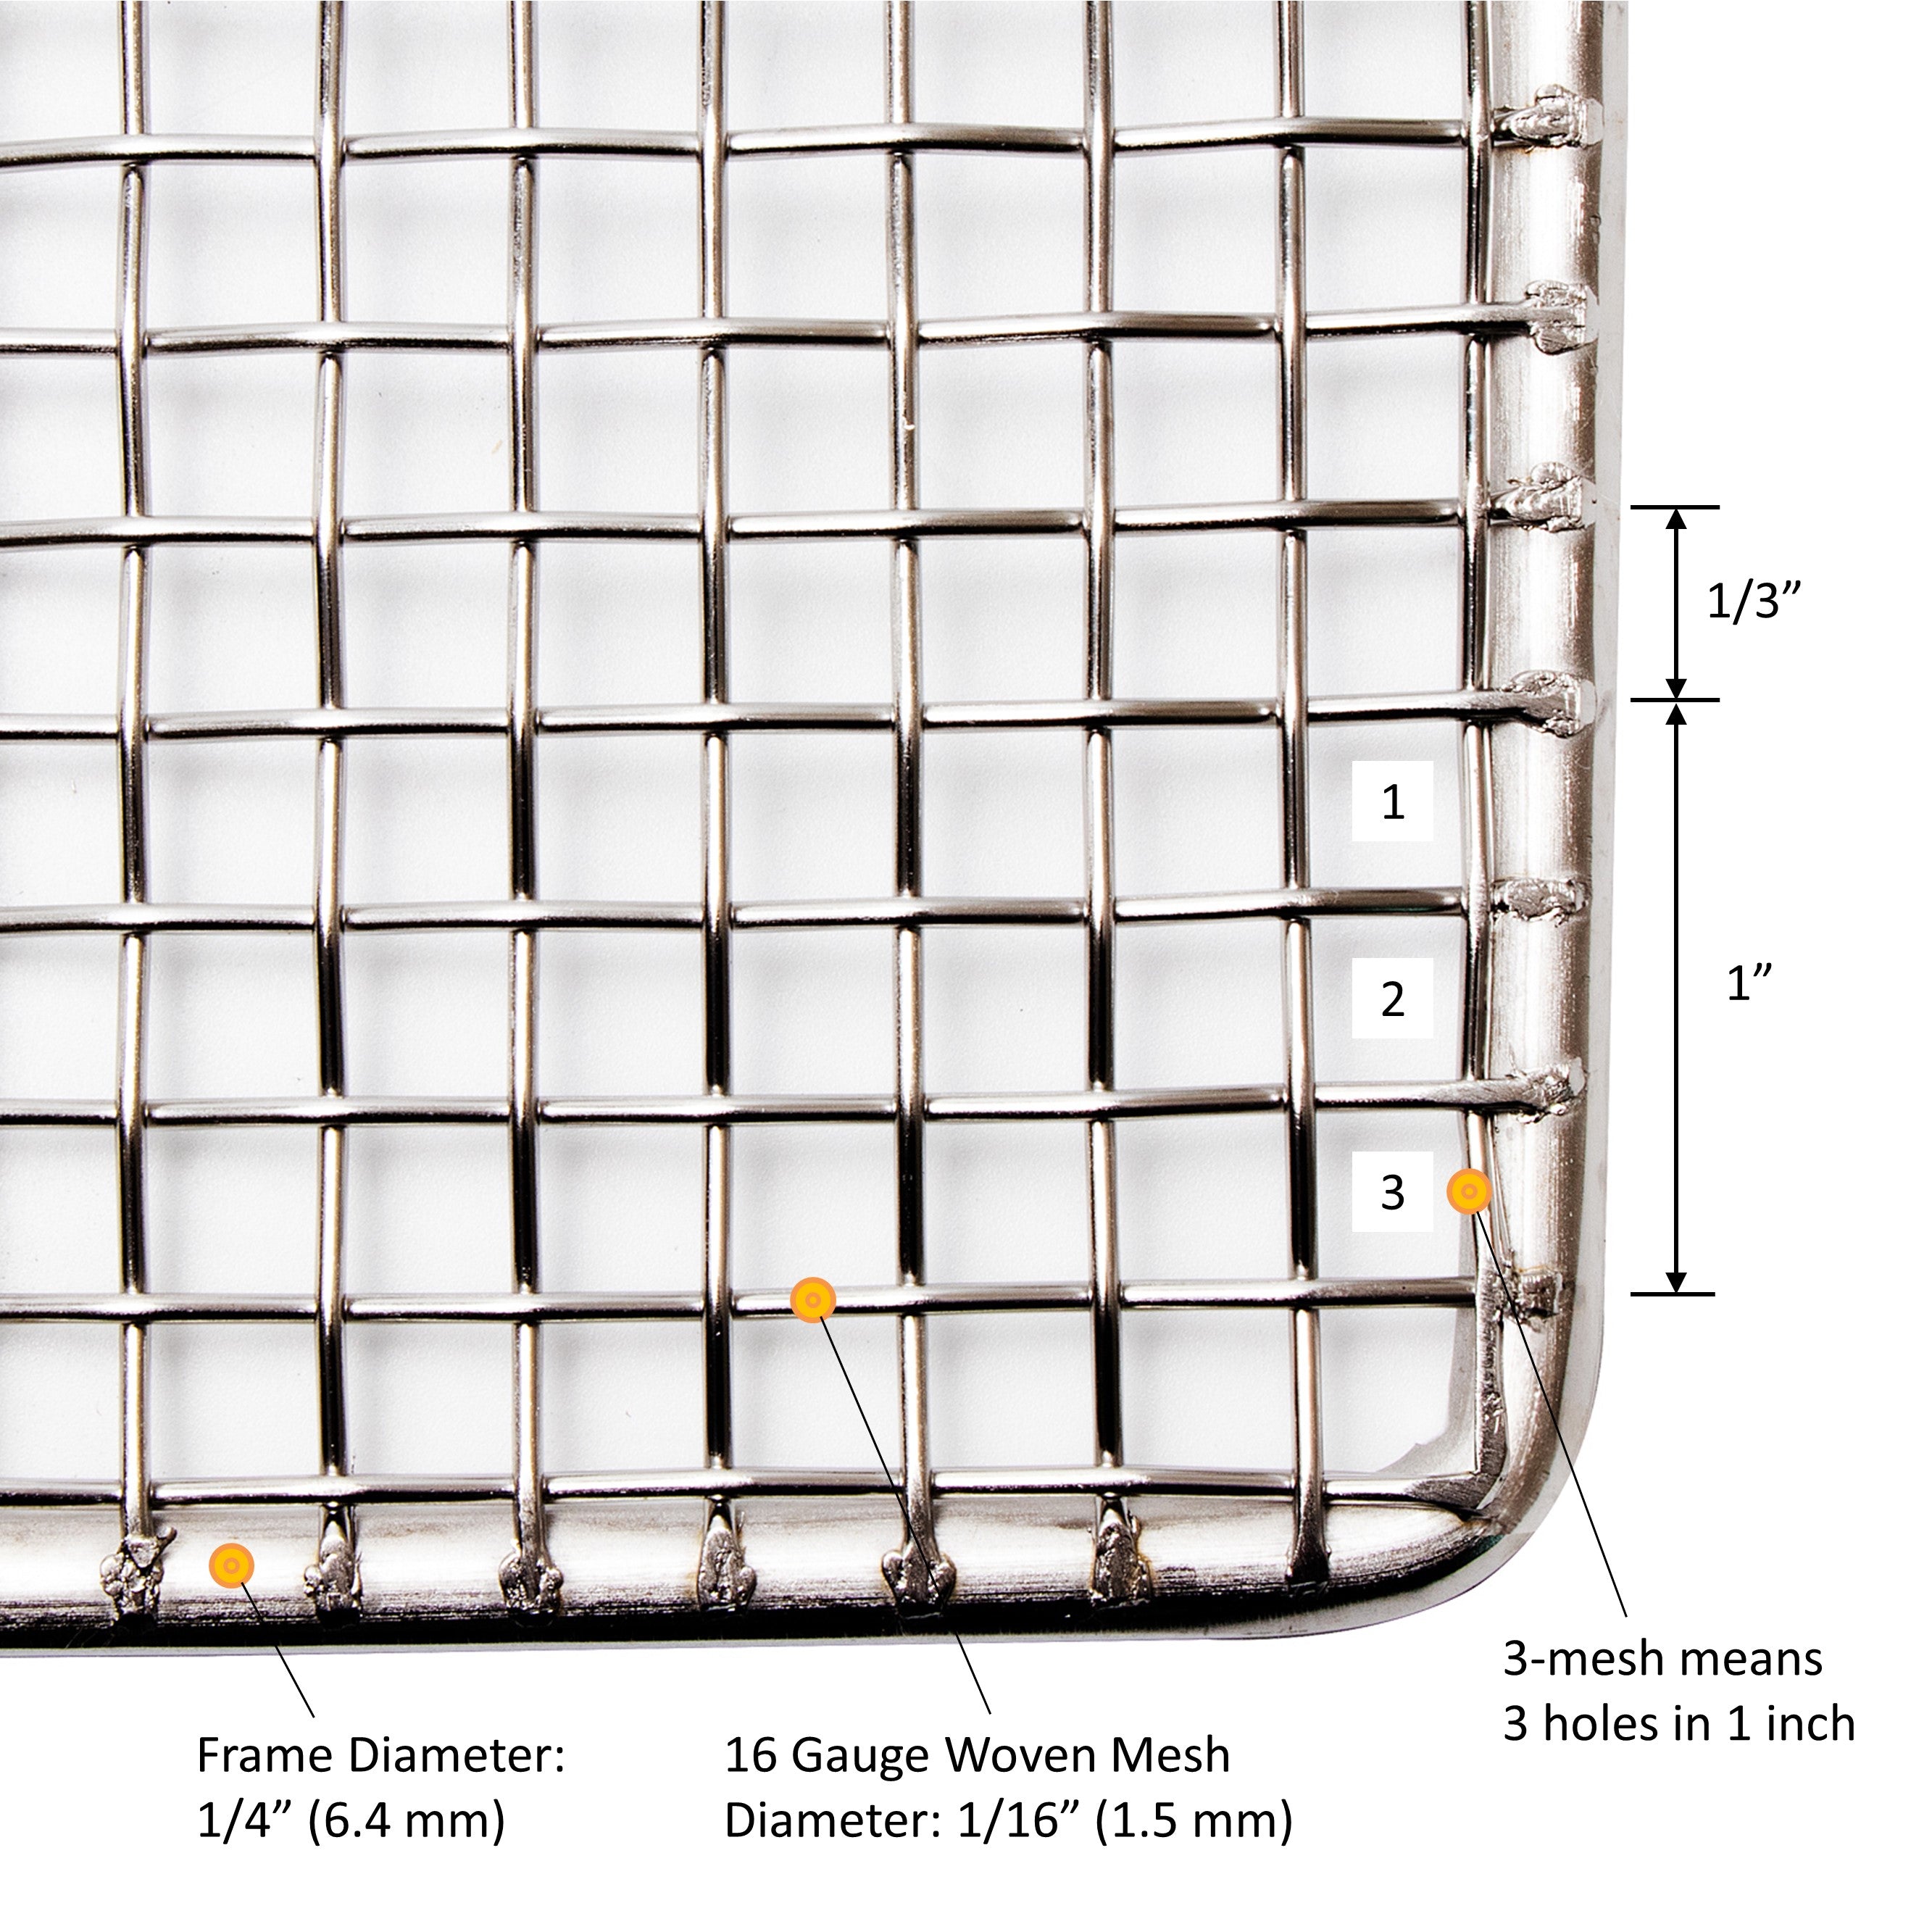 GSW 23" x 23" DN-FS23N Heavy Duty 16 Gauge 3-mesh Stainless Steel Woven Mesh Donut Frying Screen, 1/4"D Outer Frame and Support Rods